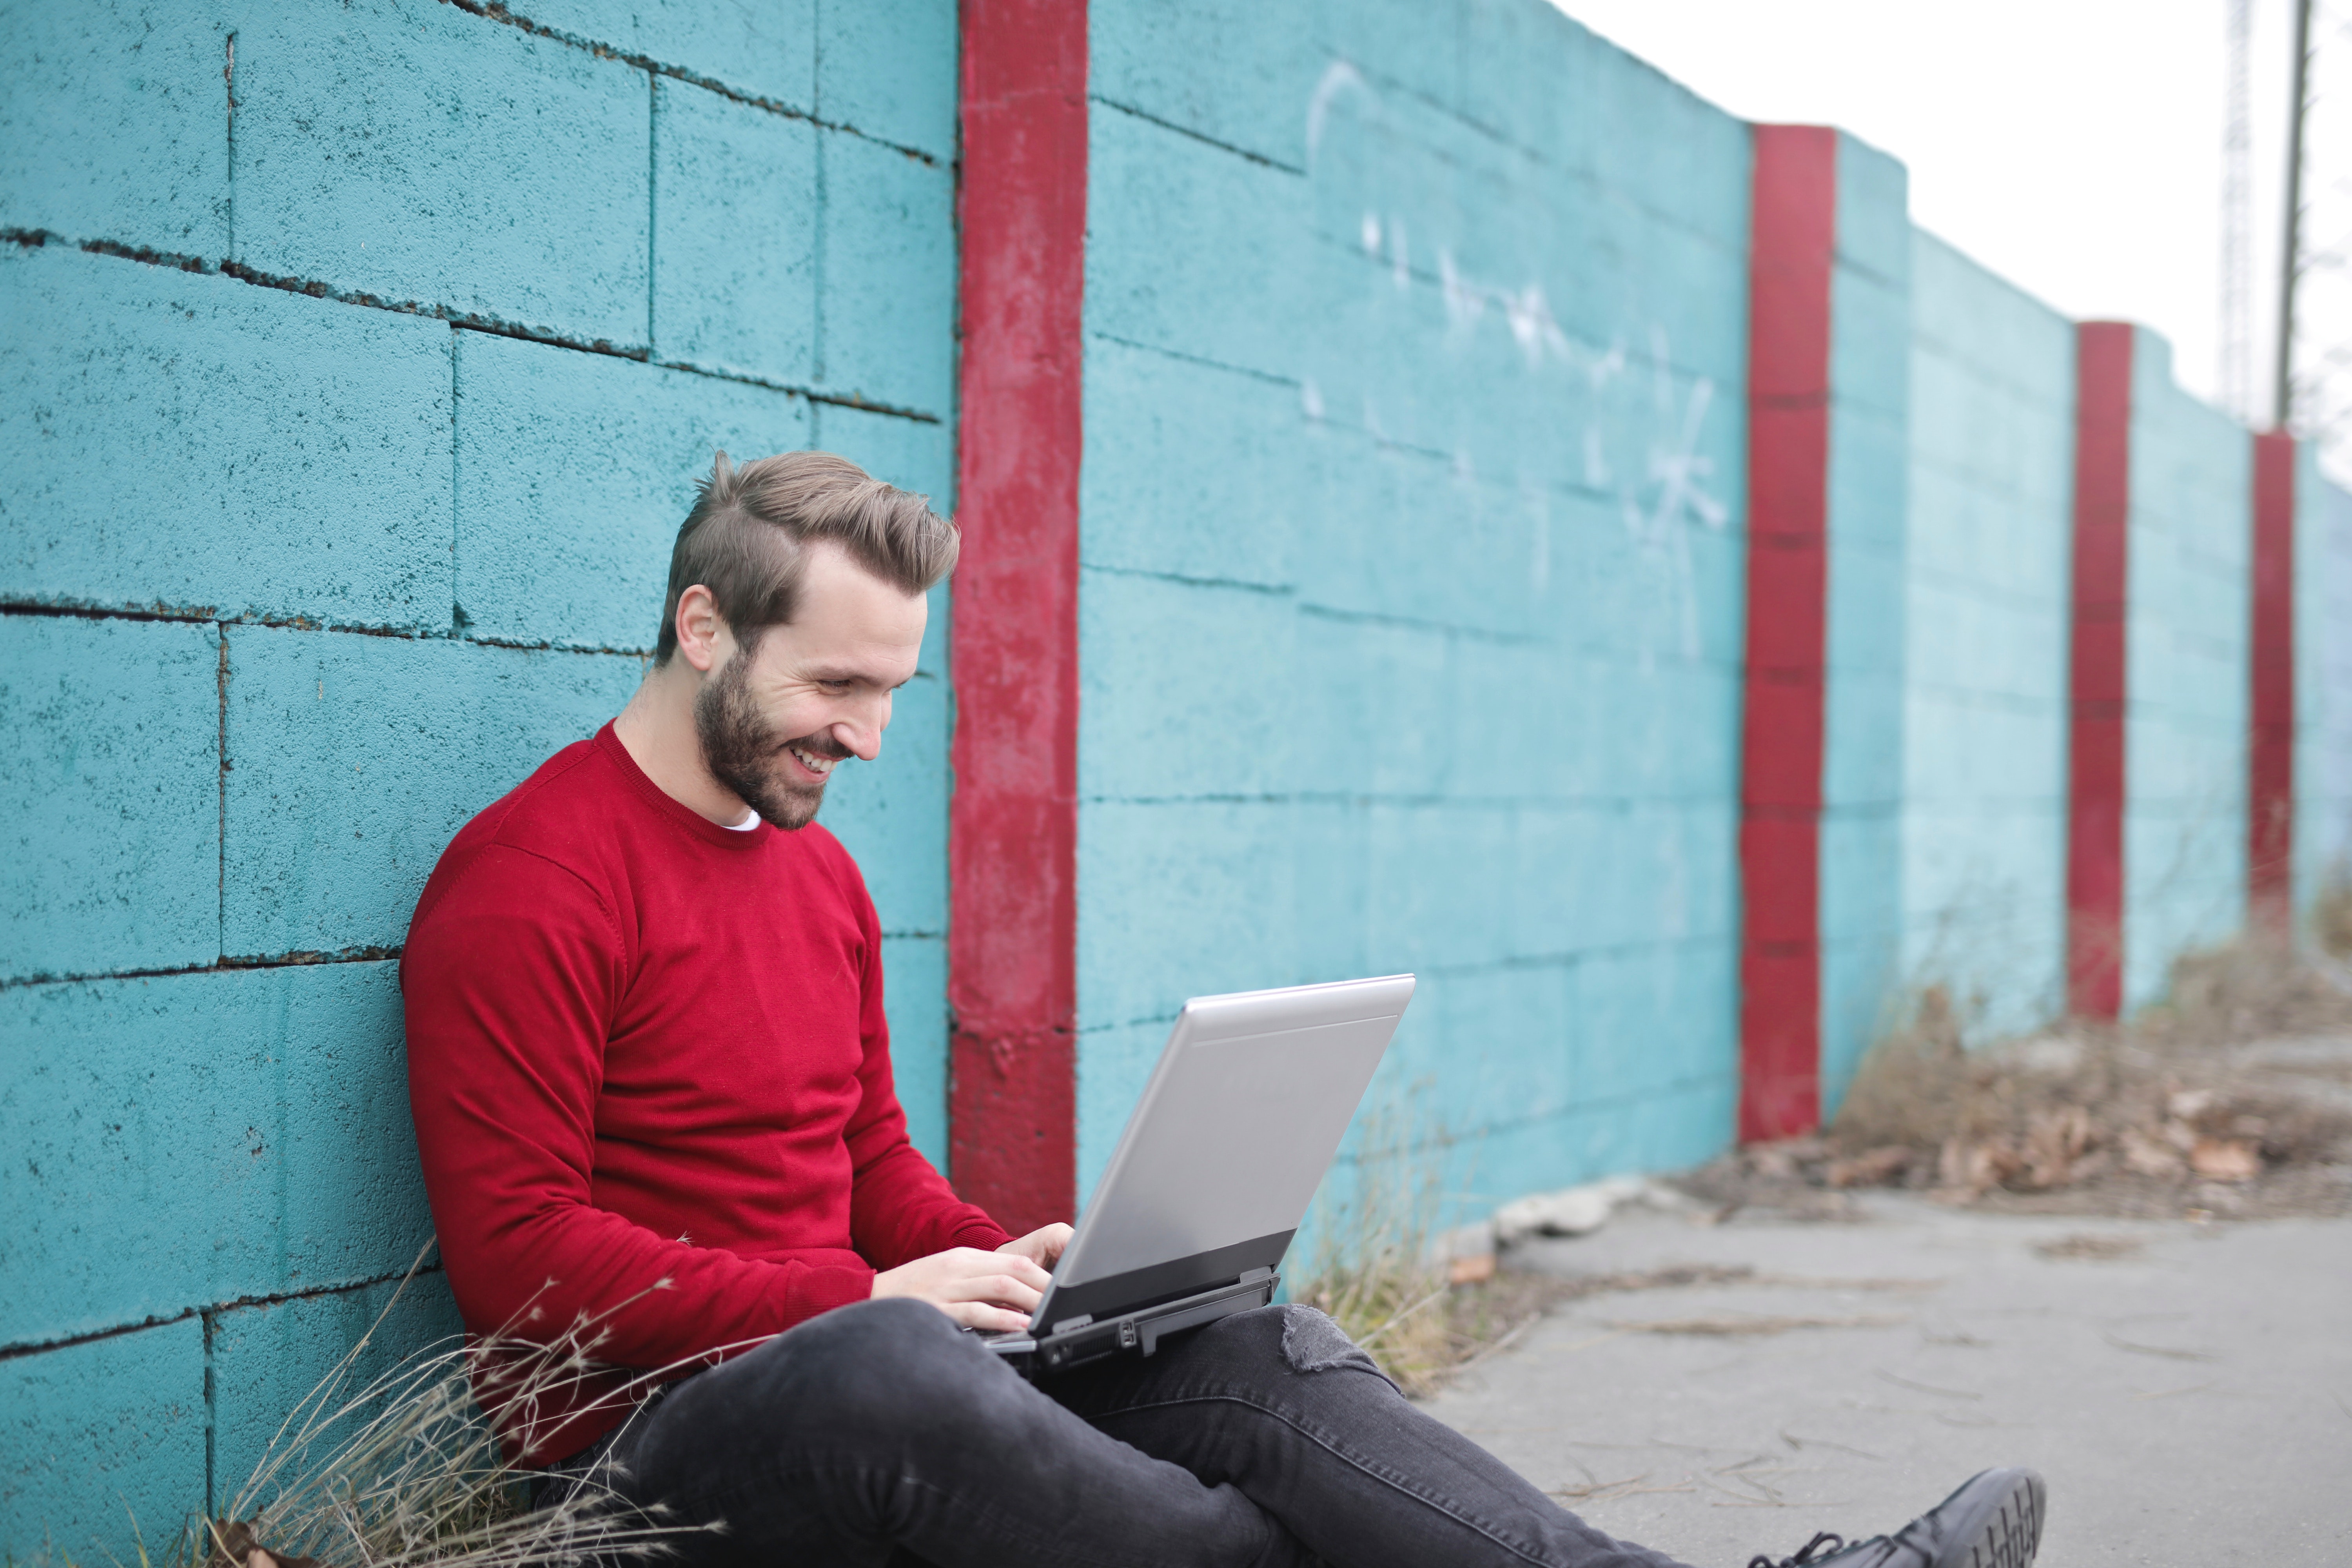 Man Leaning Against Wall Using Laptop, Notebook, Wall, Urban, Technology, HQ Photo